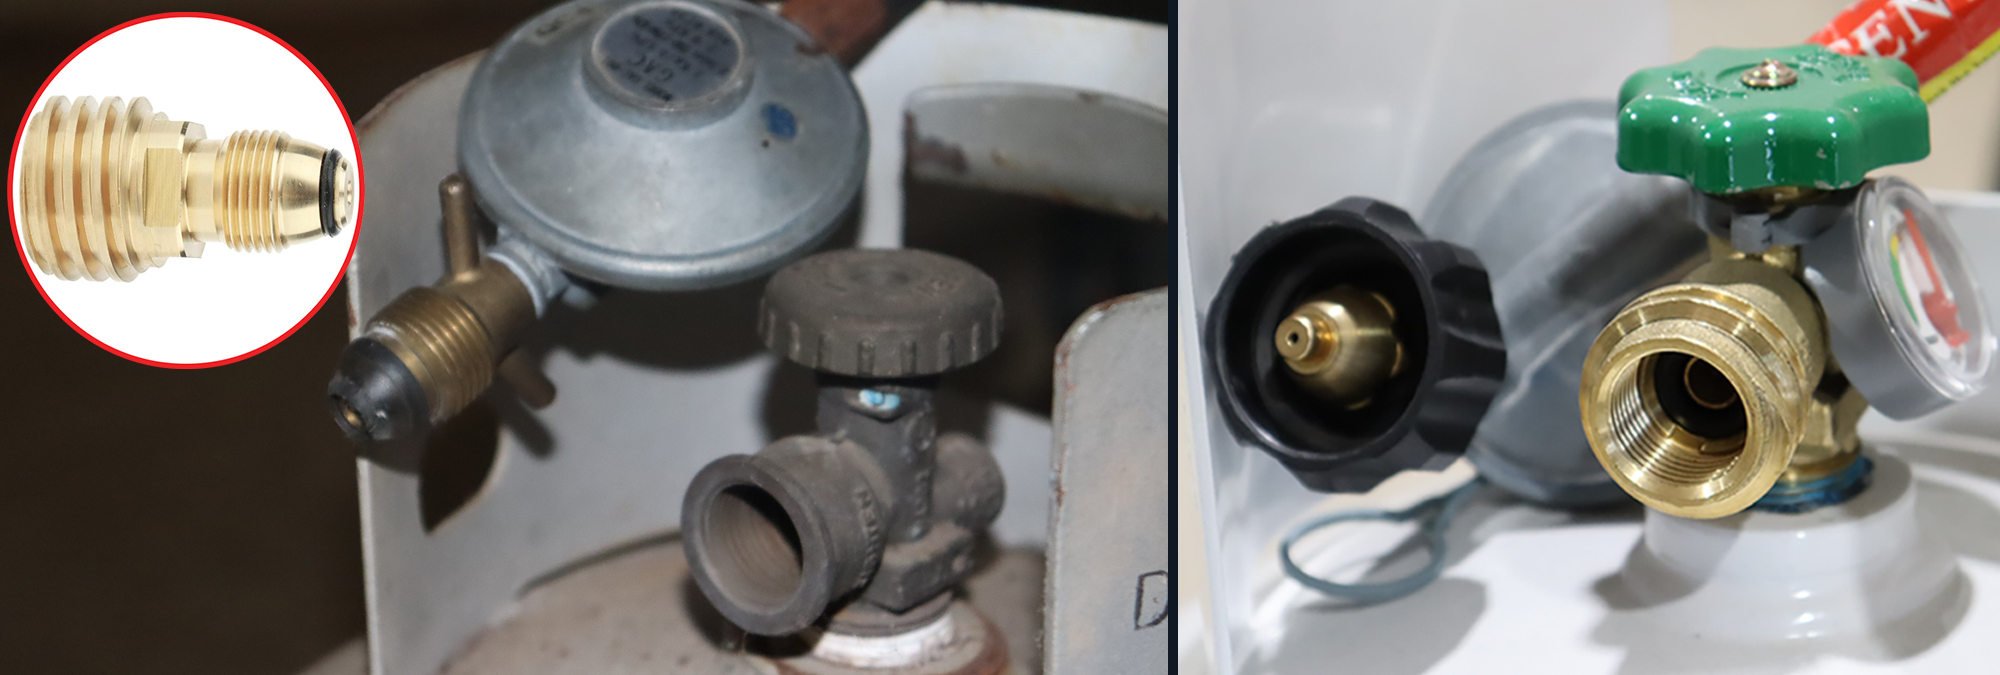 This image is a composite image. The left image is of the older type 21 POL appliance connector and cylinder connection. The image on the right shows the LCC27 appliance connector and cylinder connection. The inserted image shows an aftermarket adaptor.